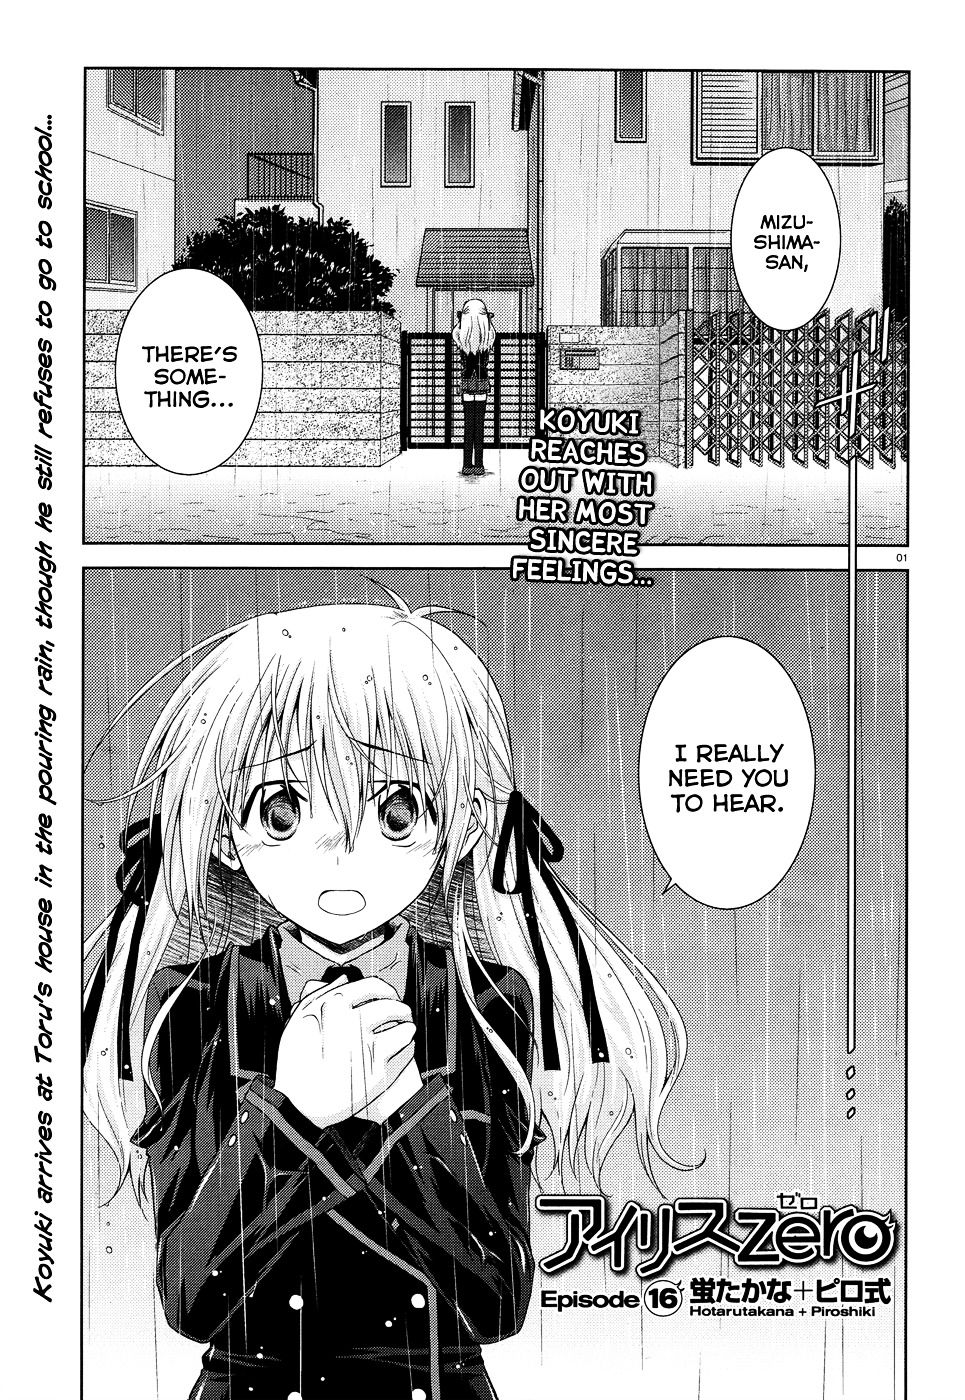 Iris Zero Vol.4 Chapter 16 : Episode 16 - The Thing That Moves, The Moving Thing - Picture 1